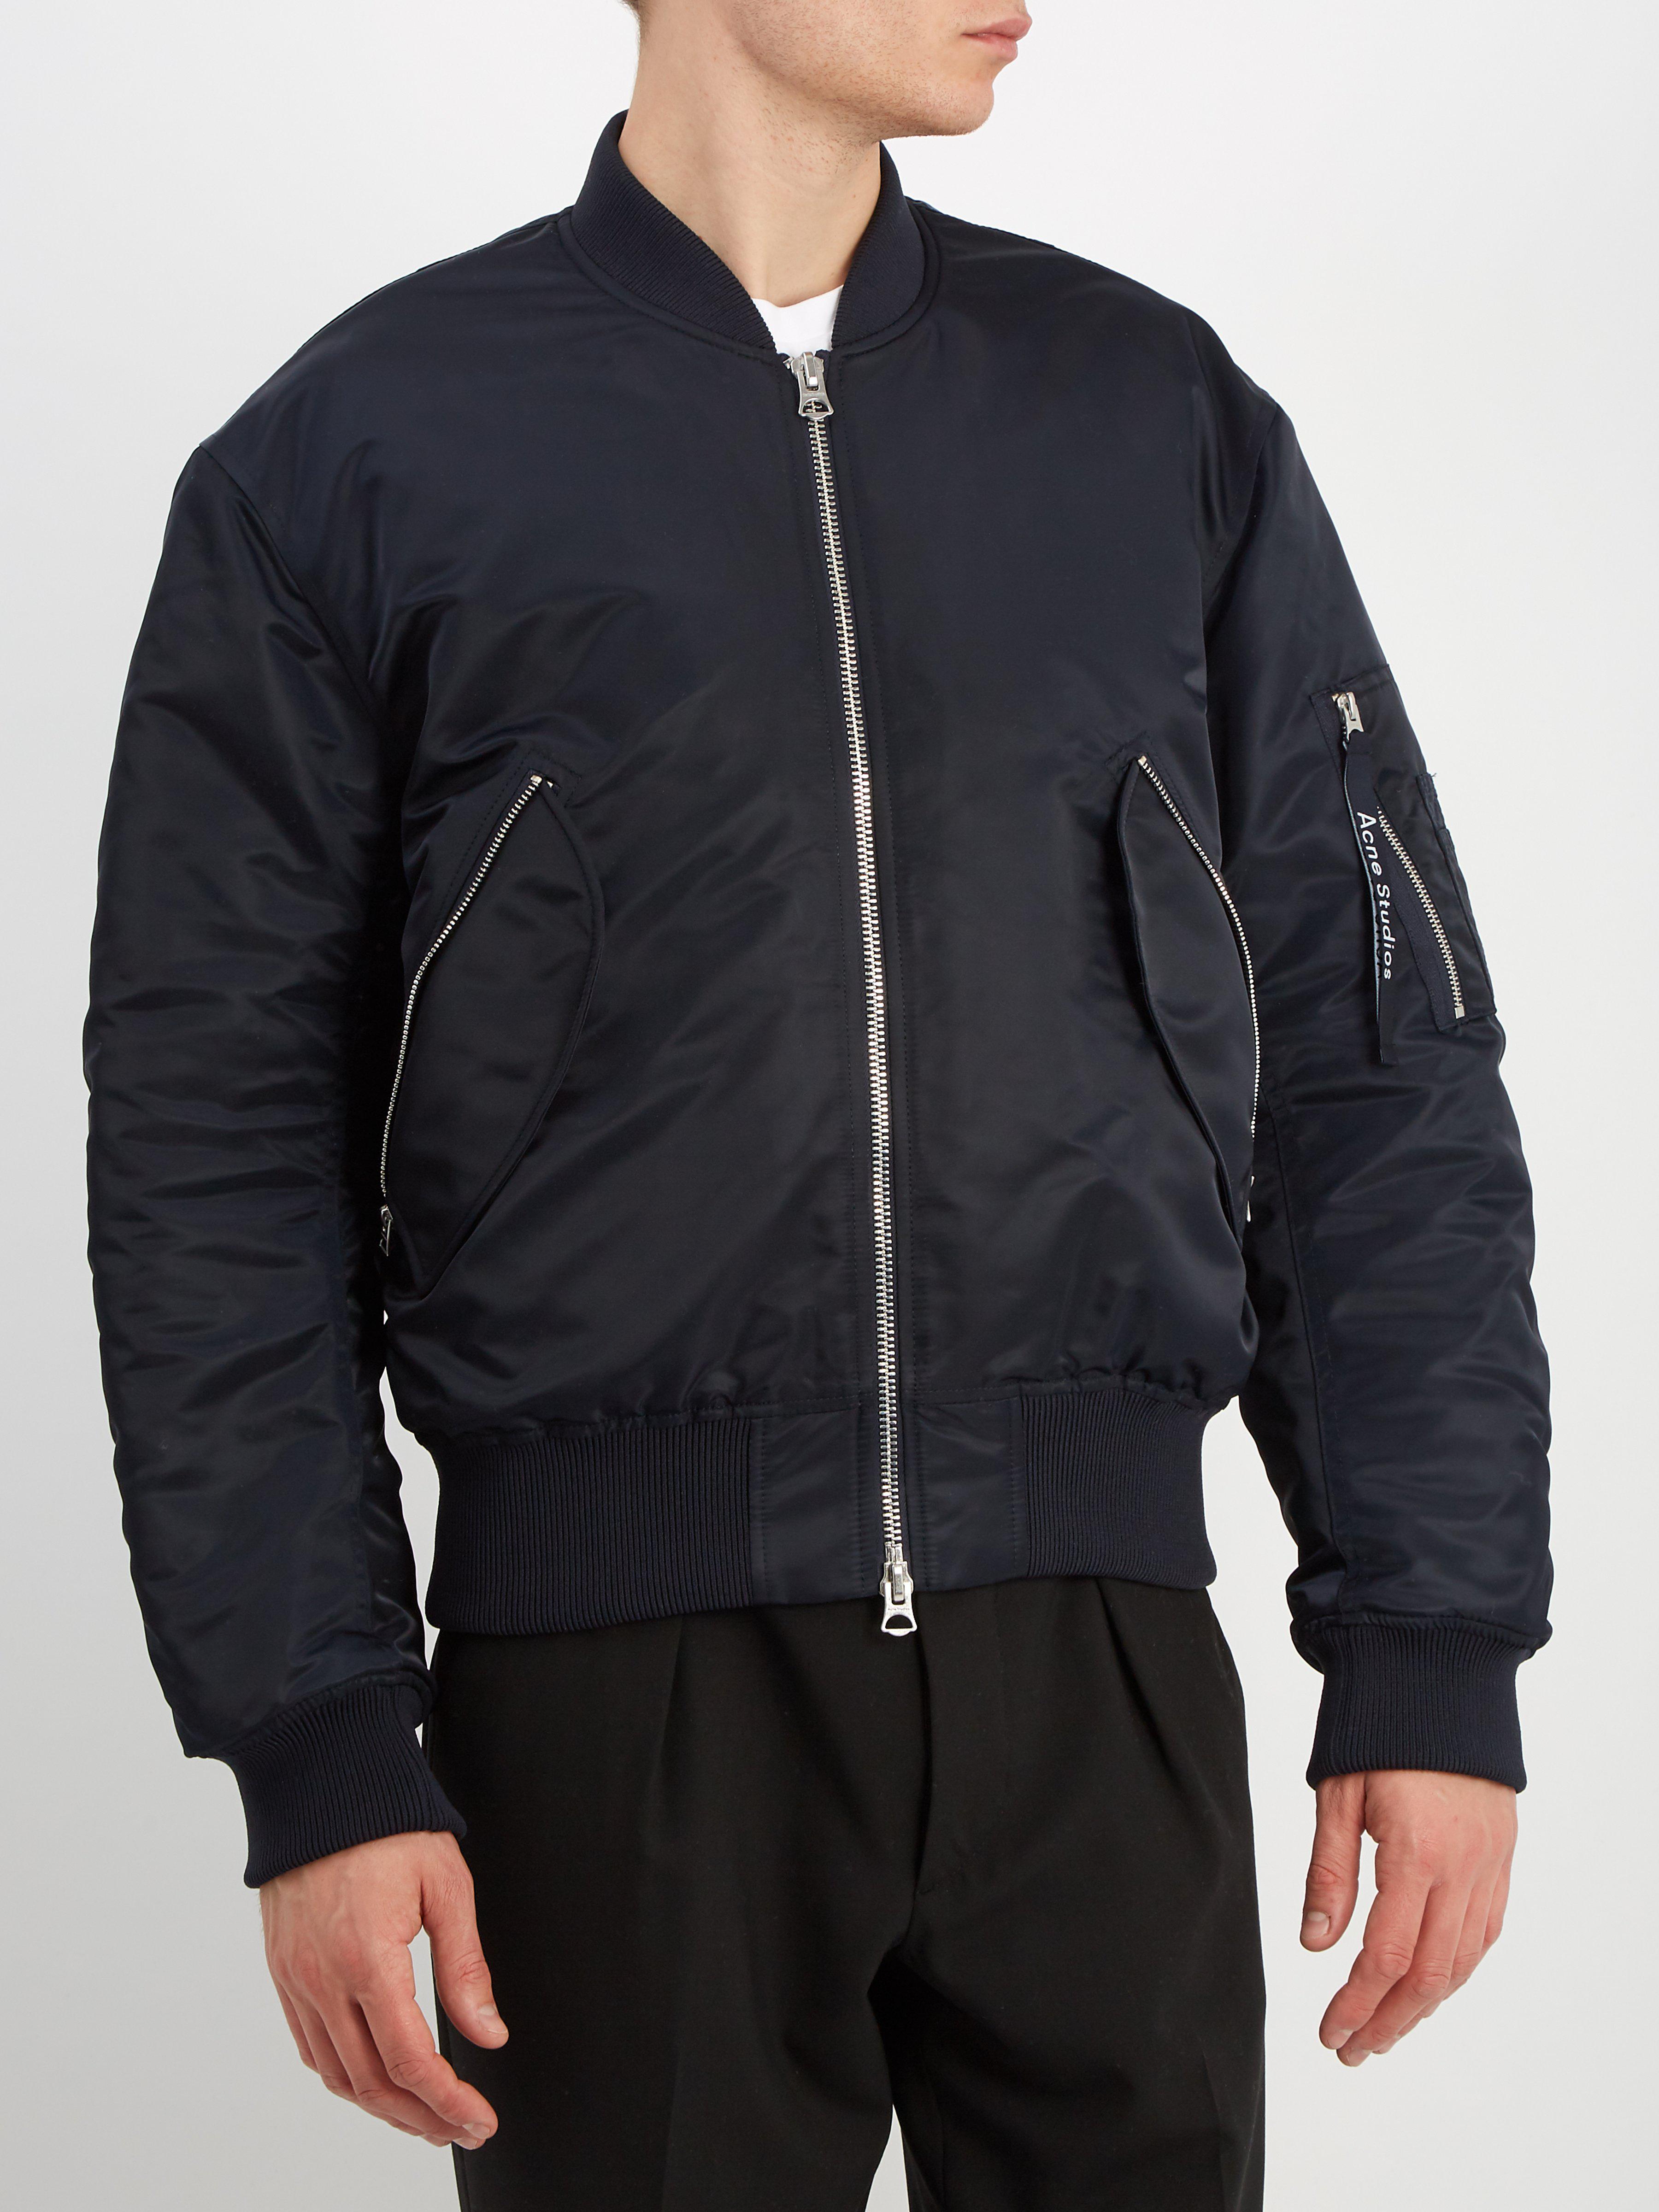 Acne Studios Synthetic Makio Padded Bomber Jacket in Blue for Men - Lyst